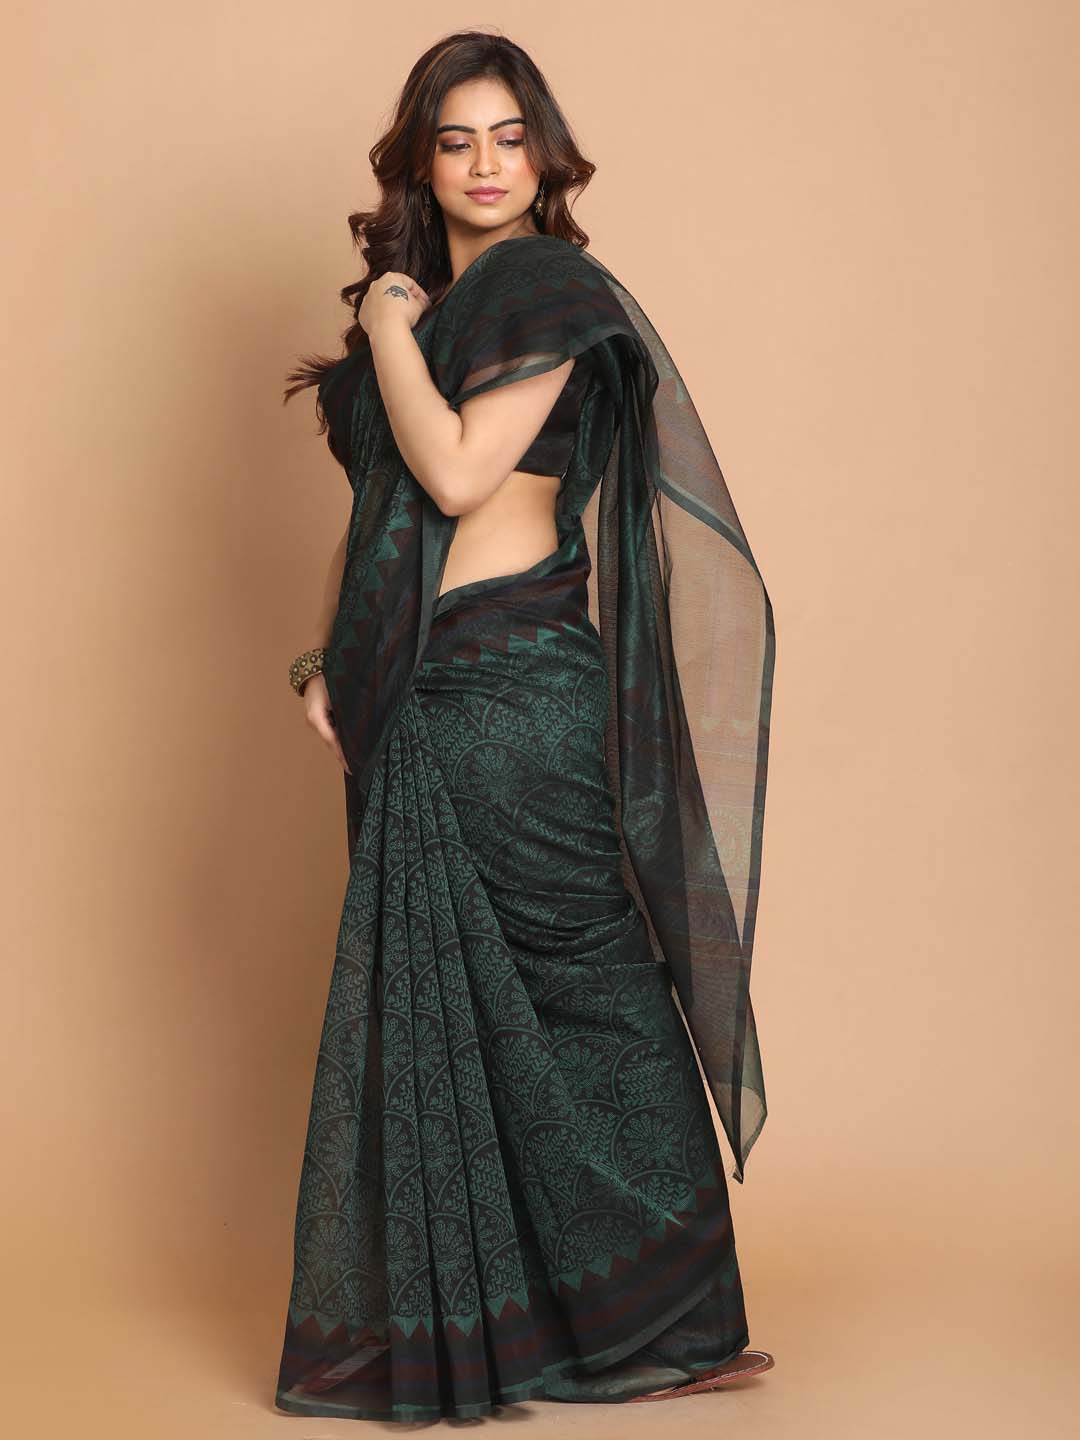 Indethnic Printed Cotton Blend Saree in Green - View 2